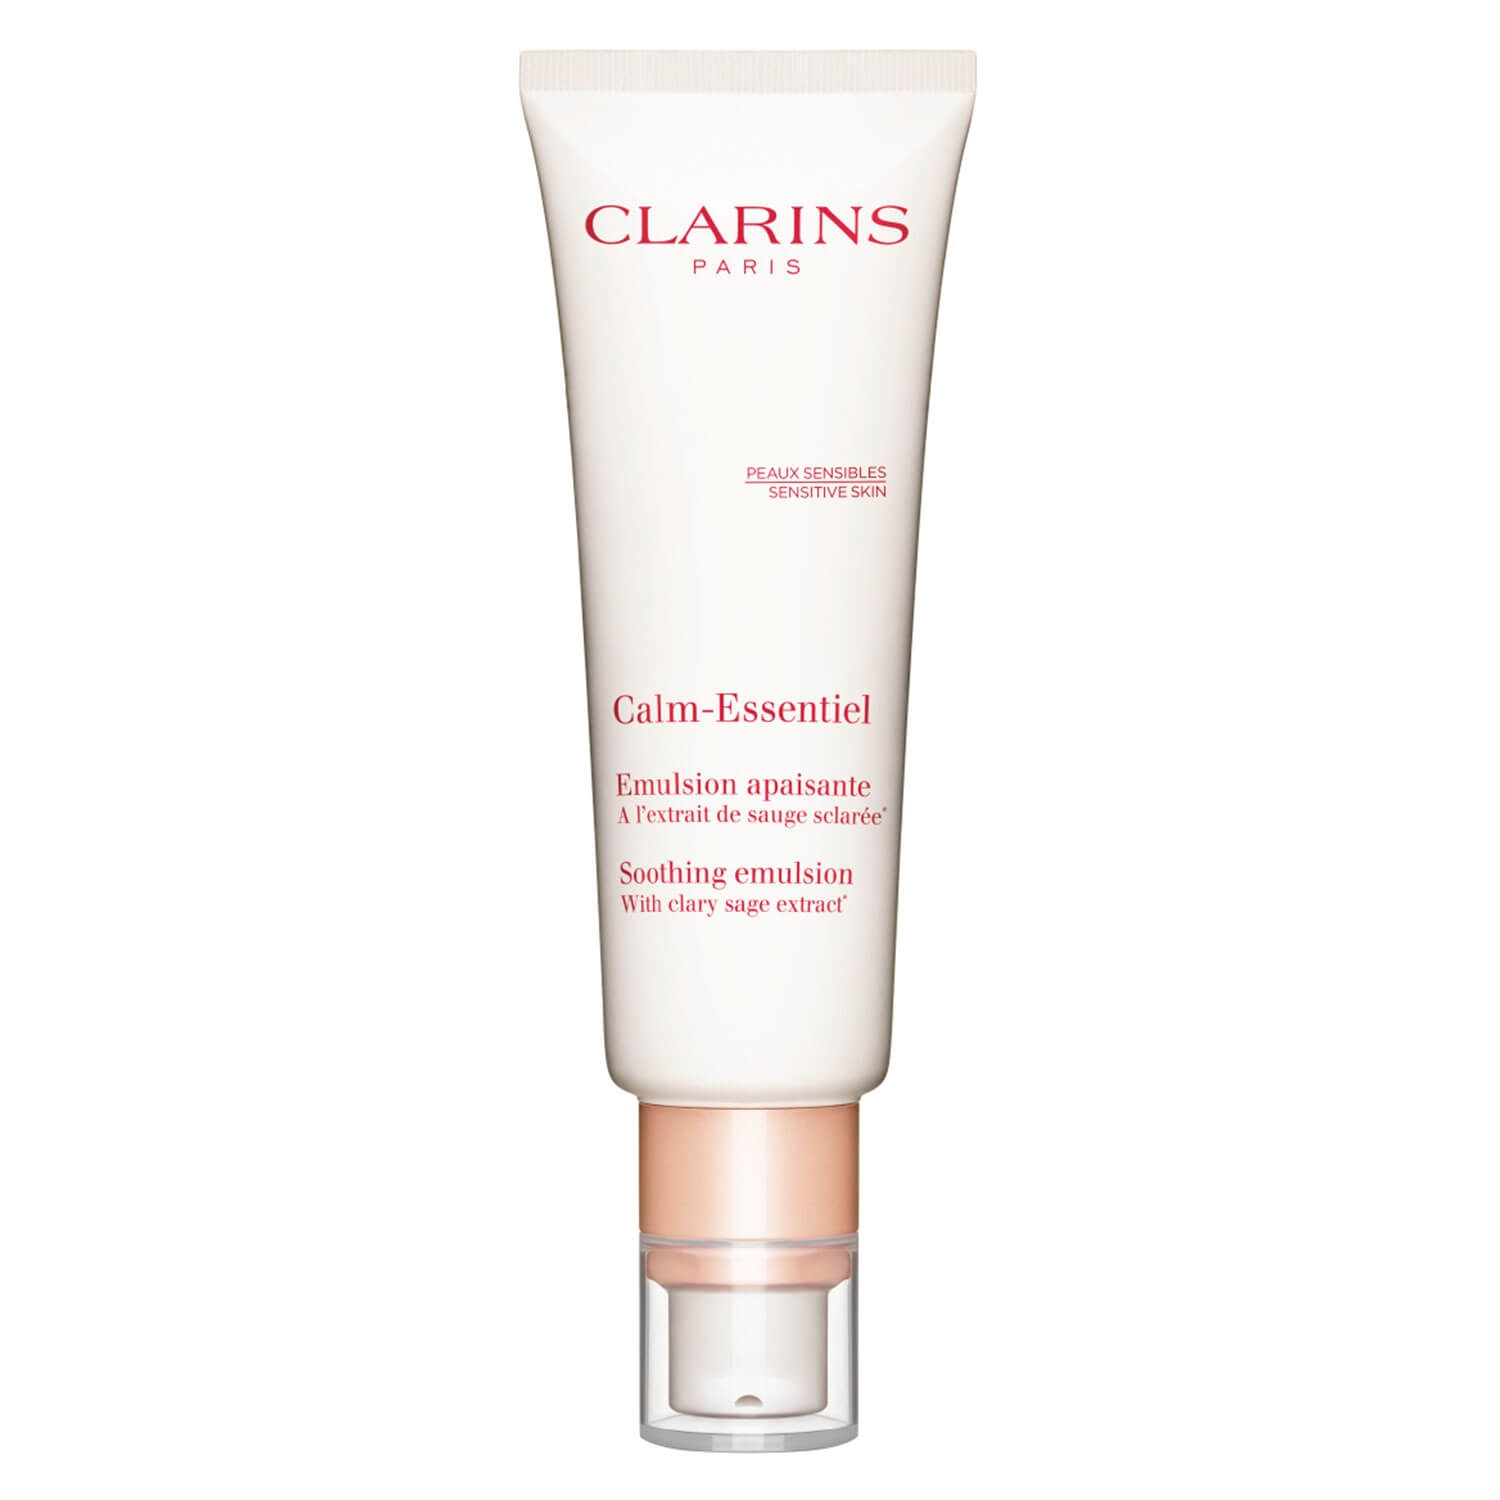 Product image from Clarins Skin - Emulsion Apaisante Calm-Essentiel